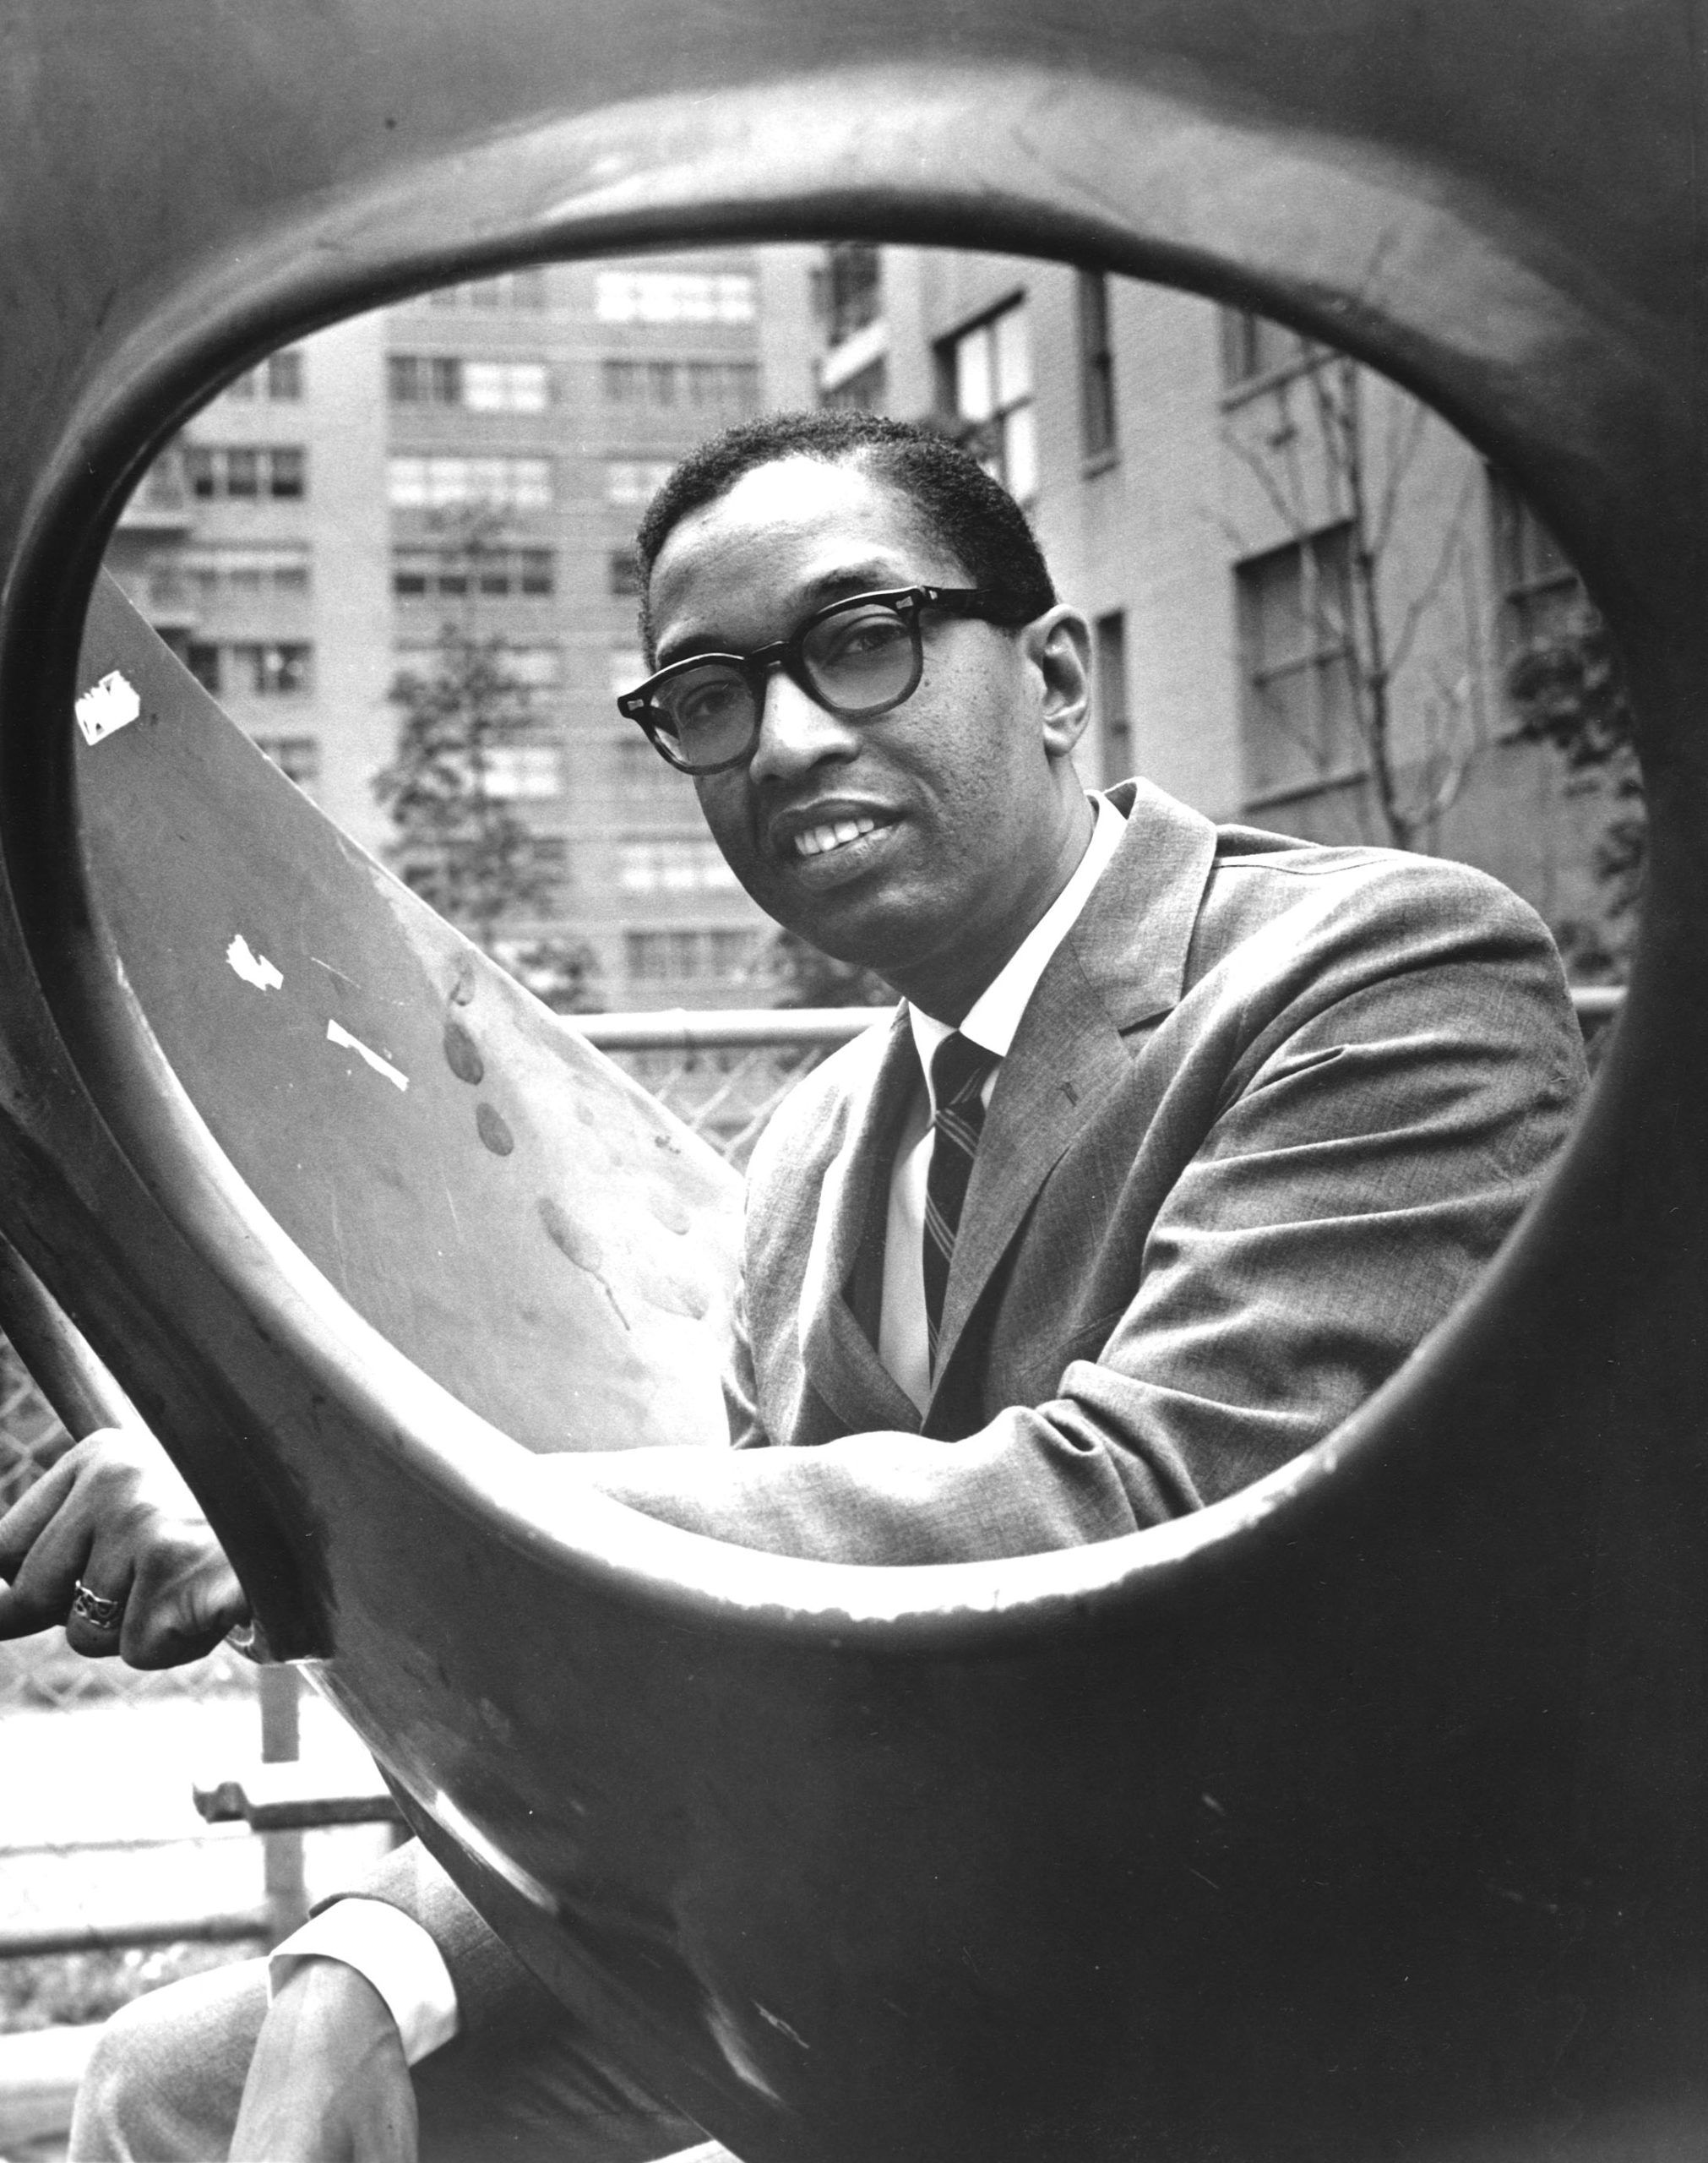 Billy Taylor (and trio) on Channel 13's SOUL!, November 7 at 9:00 P.M. "Live" and in color